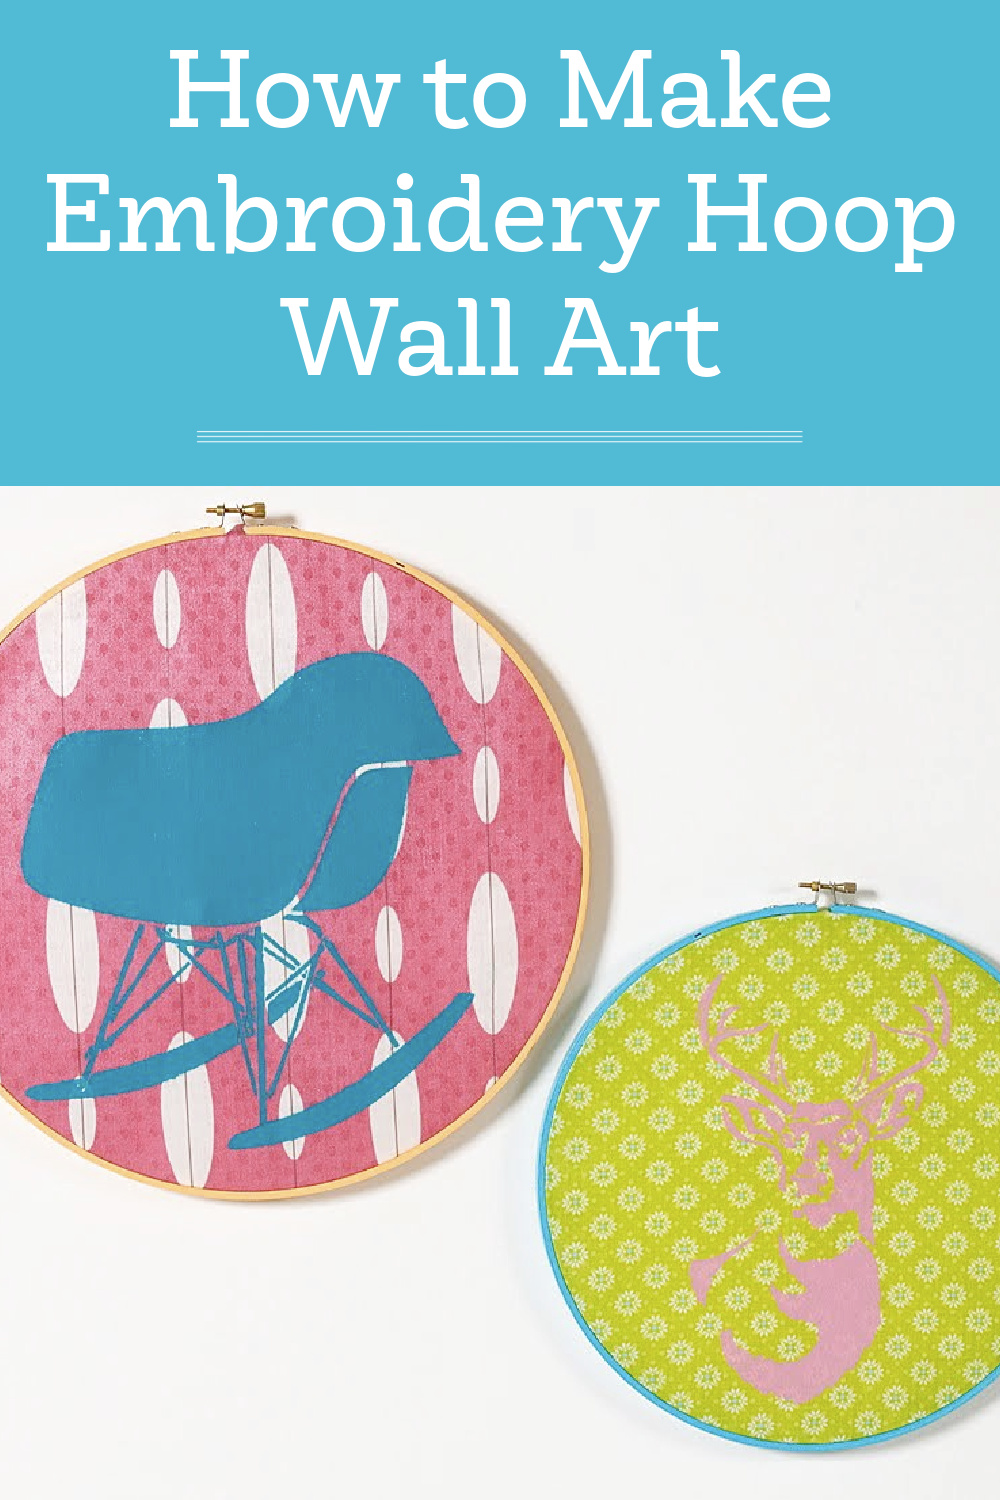 How to make embroidery hoop wall art